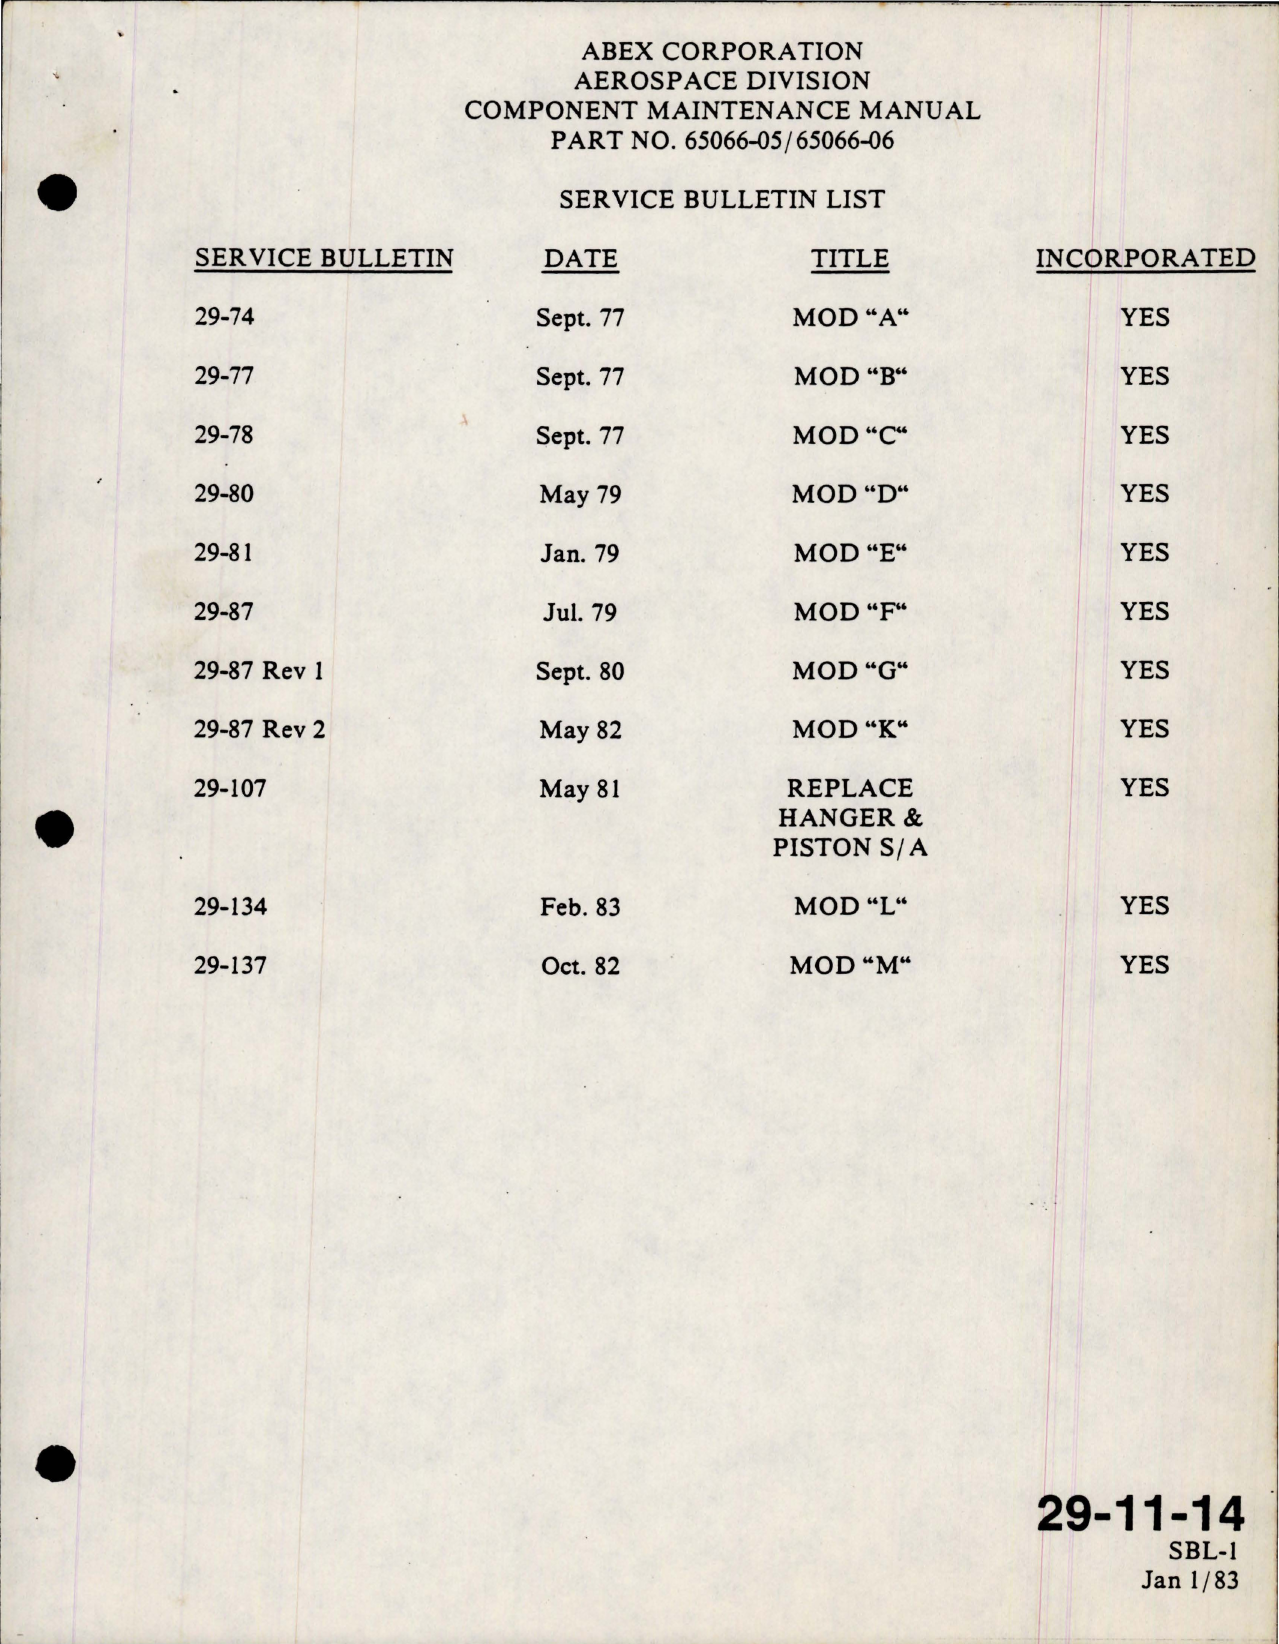 Sample page 5 from AirCorps Library document: Maintenance Manual with Parts List for Variable Delivery Hydraulic Pump - Parts 65066-05 and 65066-06 